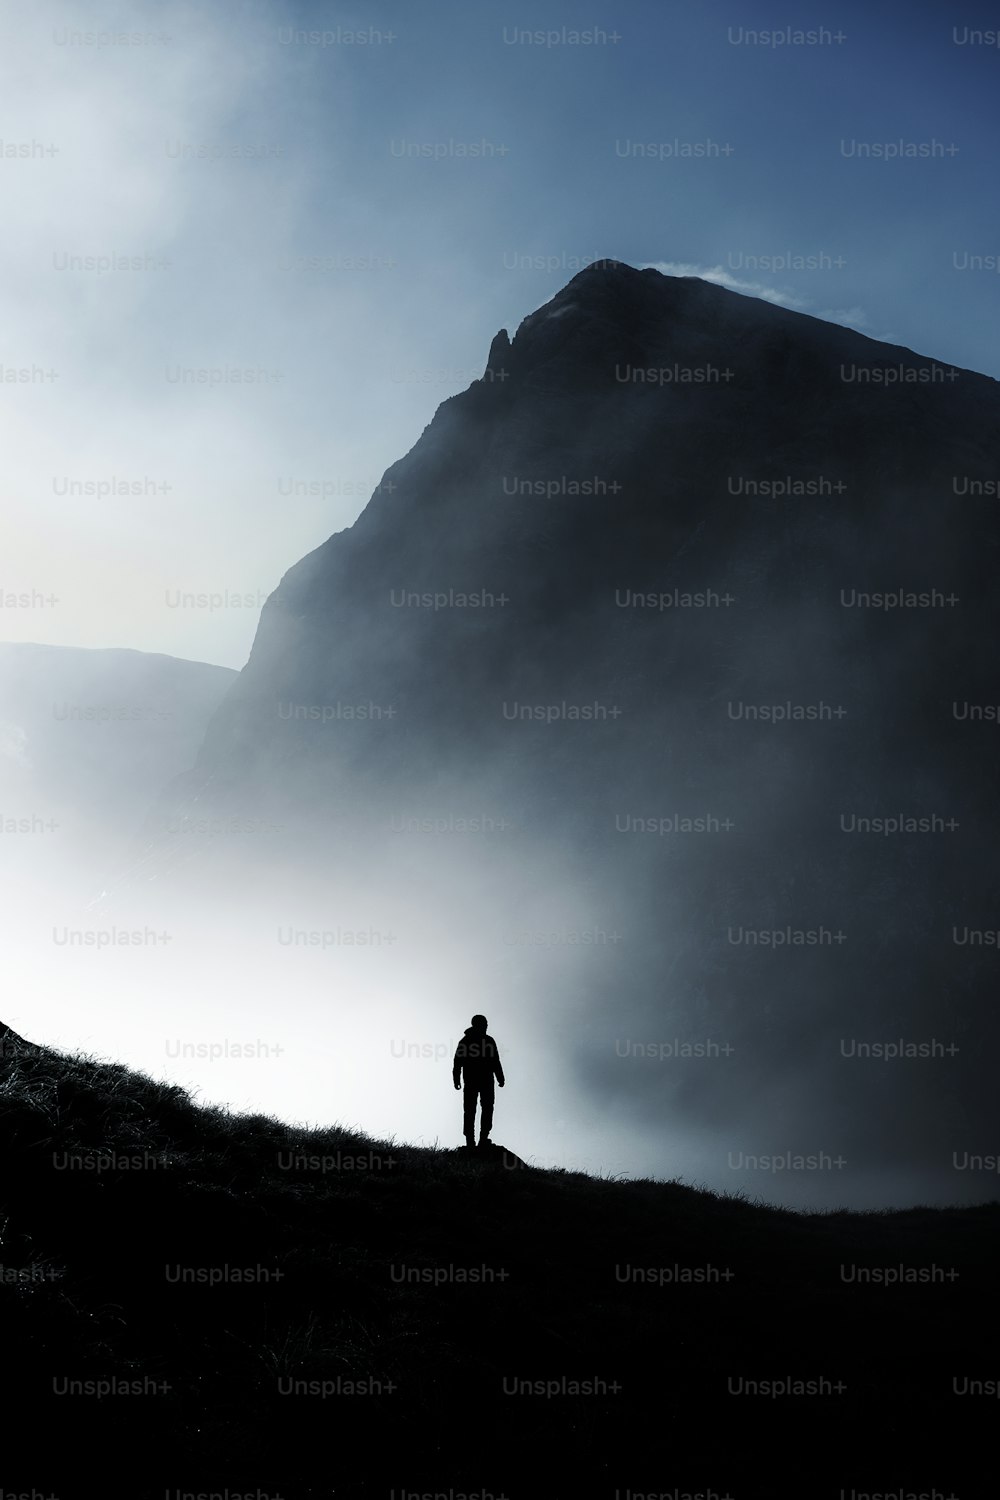 a person standing on a hill with a mountain in the background